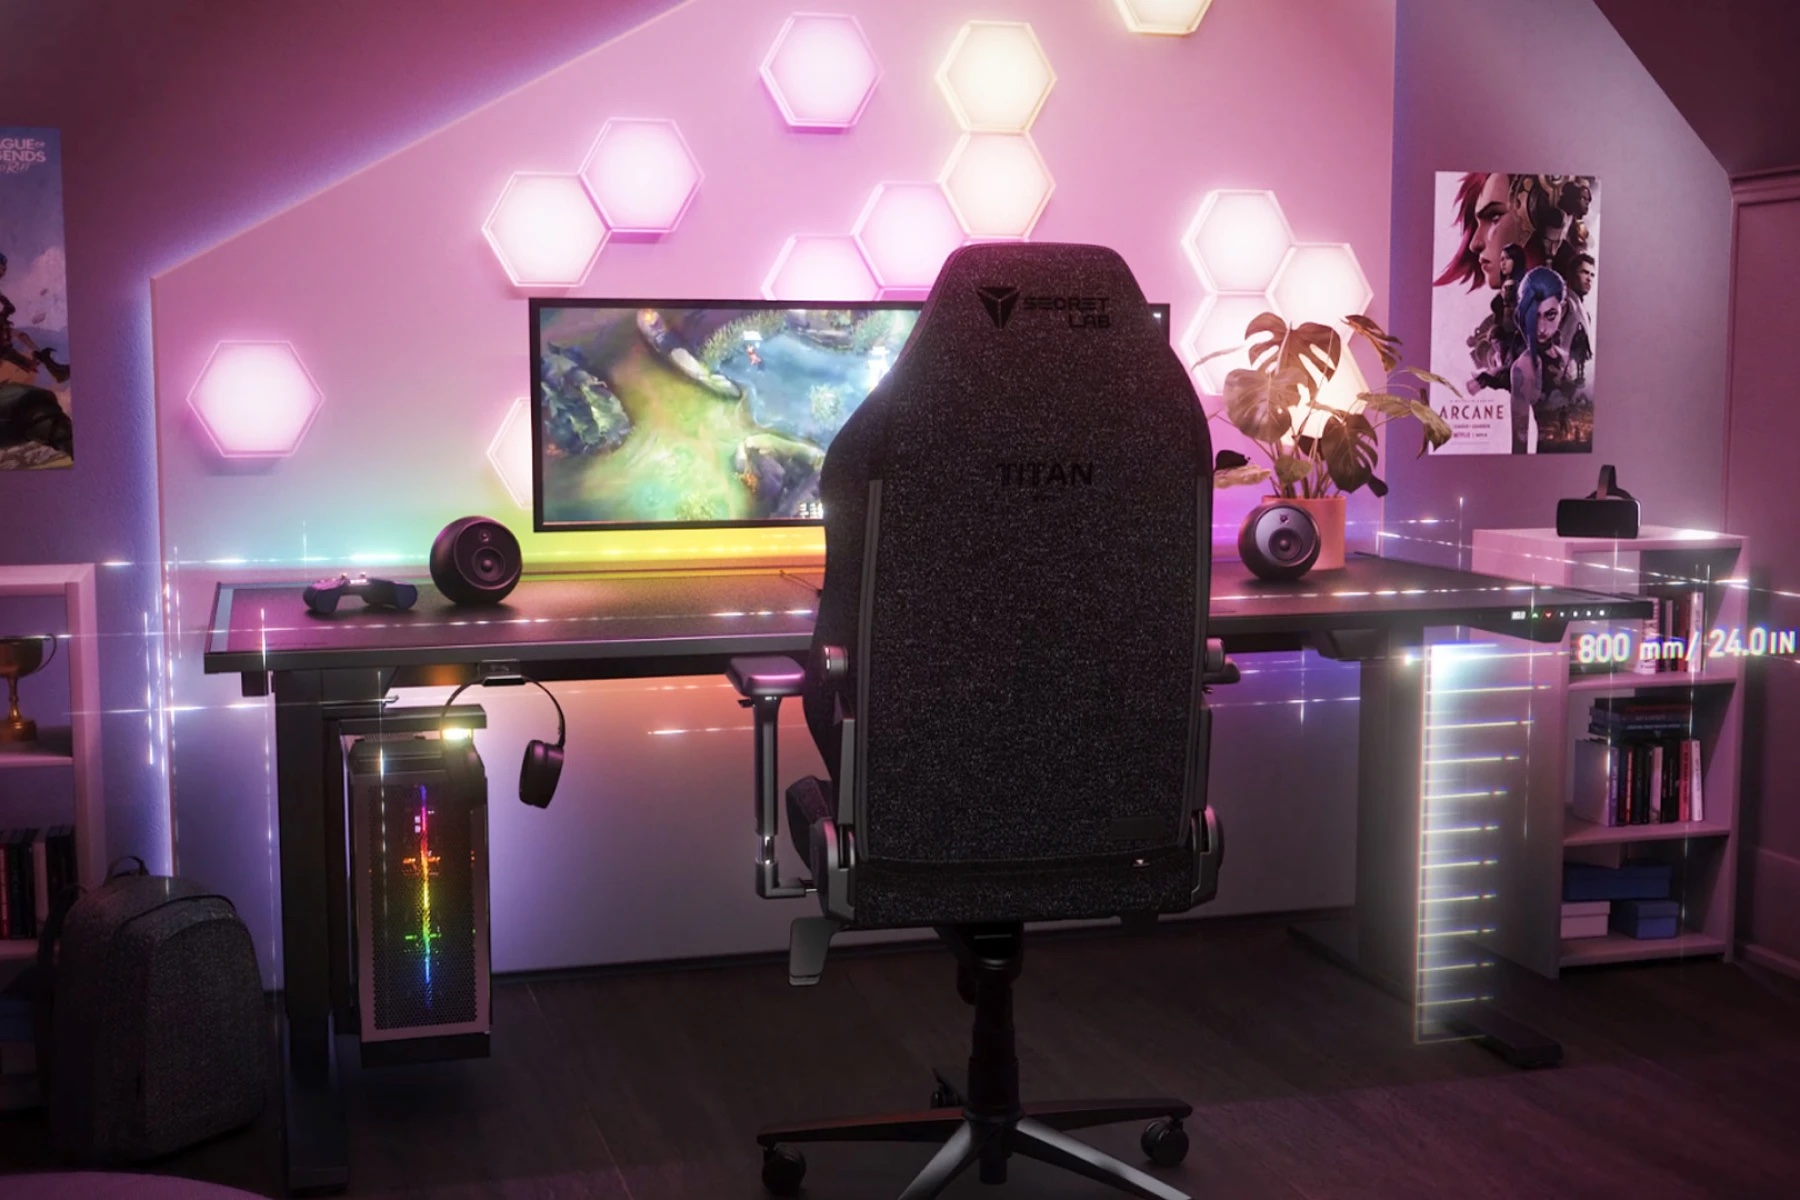 Play the ultimate dress up with your Secretlab MAGNUS desk and